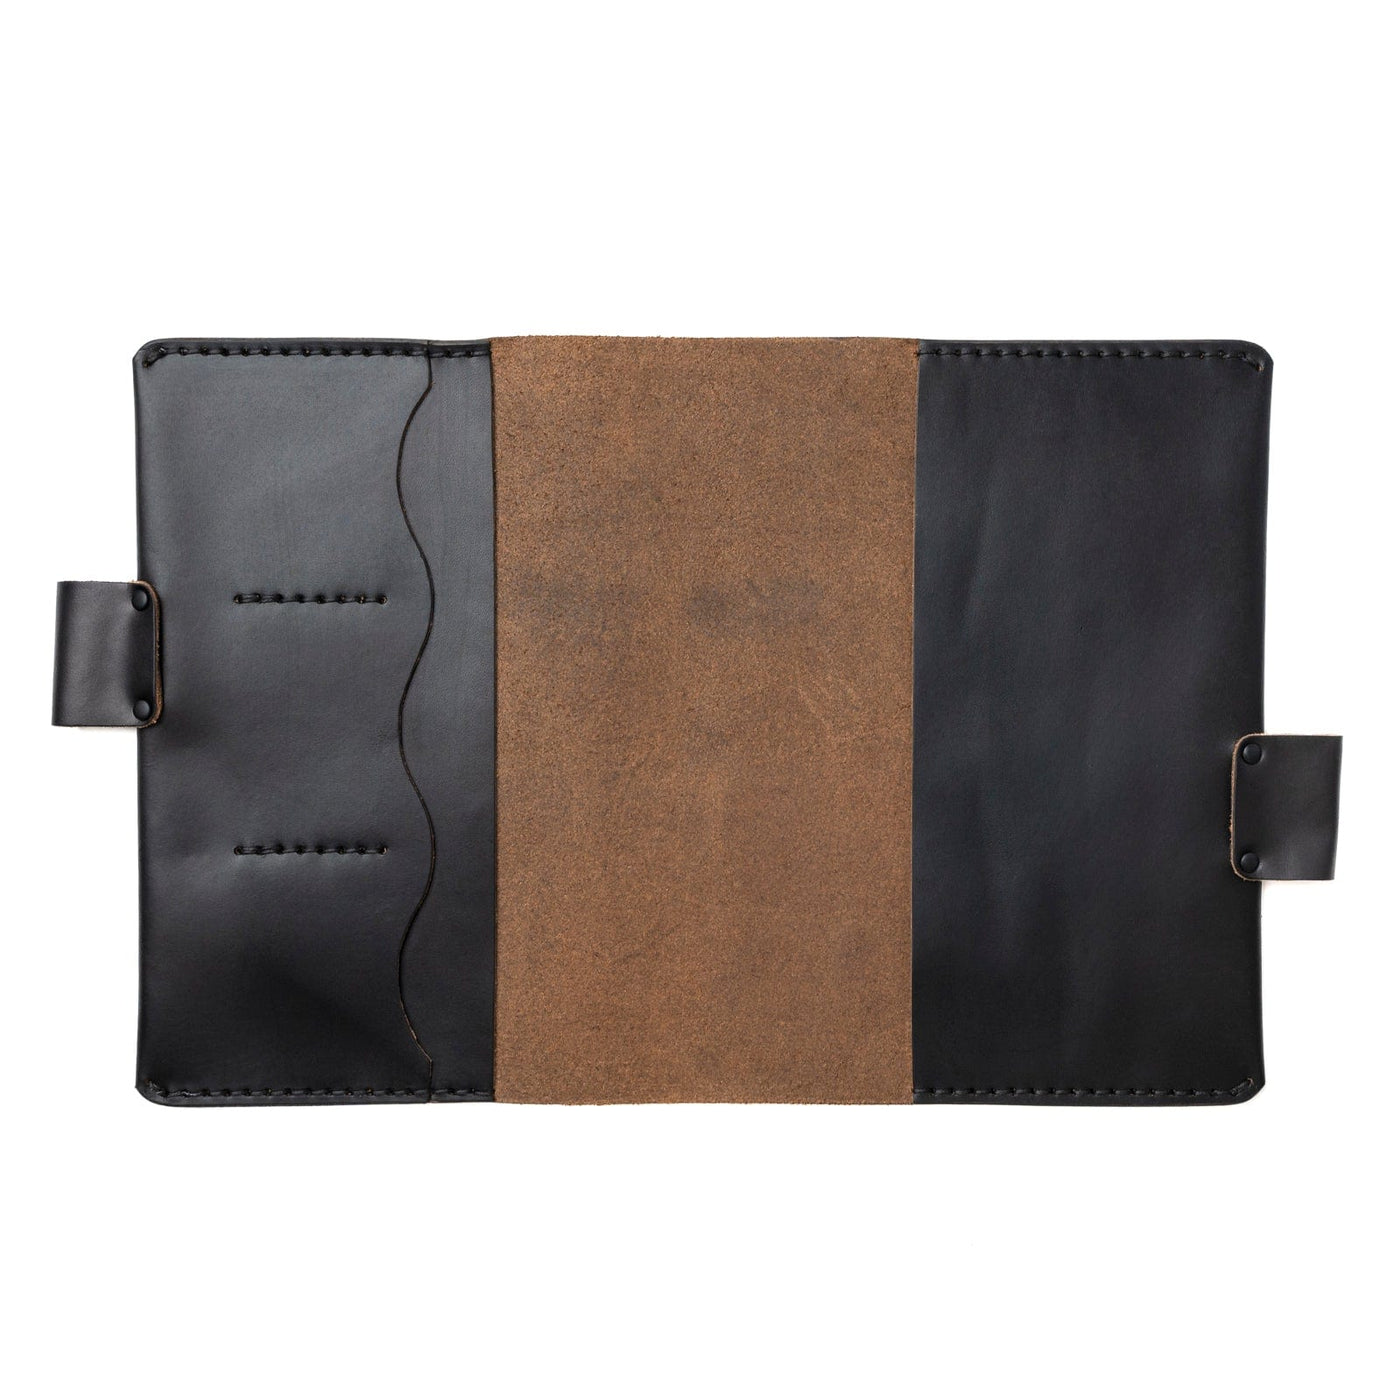 Leather Leuchtturm1917 A5 Notebook Cover - Black Popov Leather